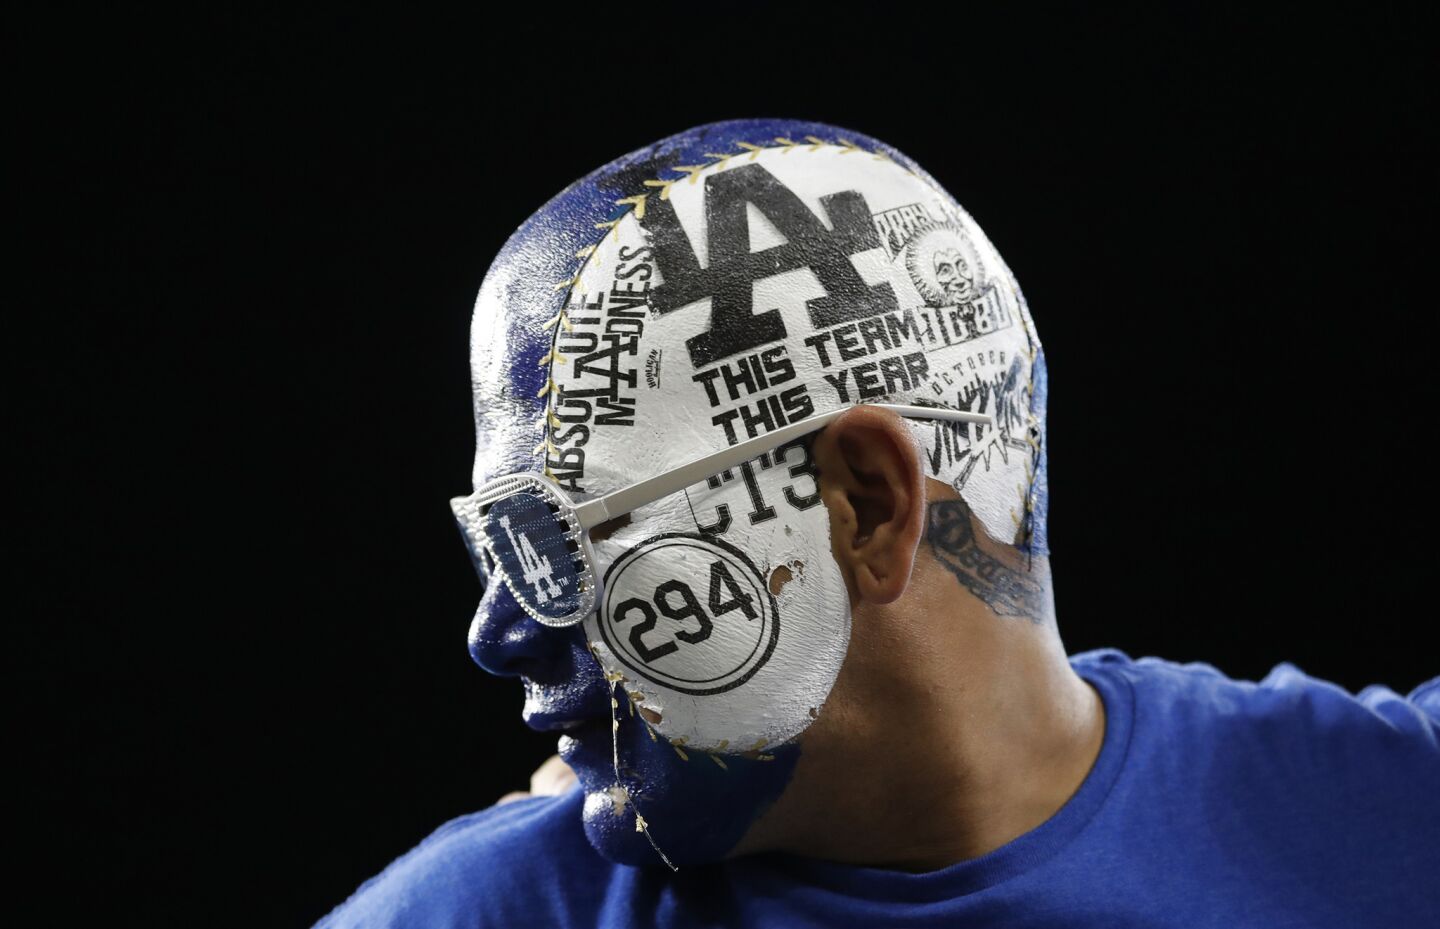 Fan Angel Rodriguez of East Los Angeles wears his Dodgers pride on his face while watching Houston win 7-6 in the 11th inning to even the series.